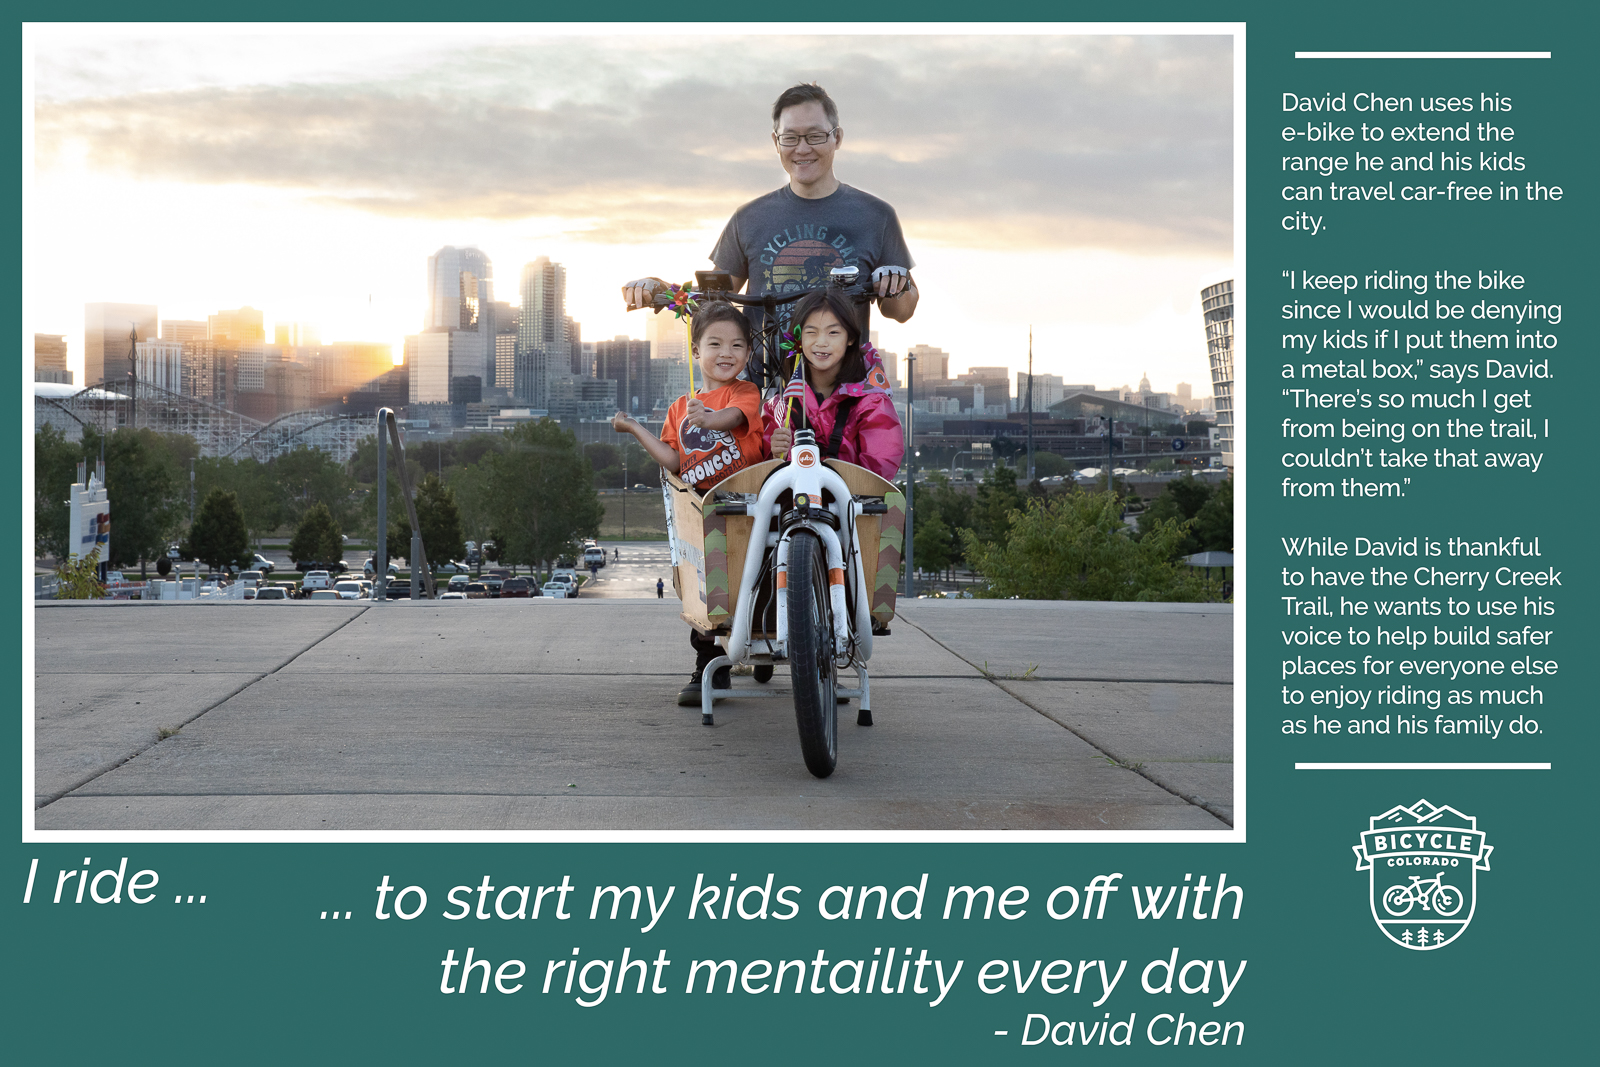 A "why I ride" graphic with David Chen, posing with his two children sitting in the front basket of a bakfiet style eBike with a view of downtown Denver in the background. The text reads "I ride to start my kids and me off with the right mentality every day. David Chen uses his eBike to extend the rangehe and his kids can travel car-free in the city. "I keep riding the bike since I would be denying my kids if I put them into a metal box," says David. "There's so much I get from being on the trail, I couldn't take that away from them." While David is thankful to have the Cherry Creek Trail, he wants to use his voice to help build safer places for everyone else to enjoy riding as much as he and his family do."